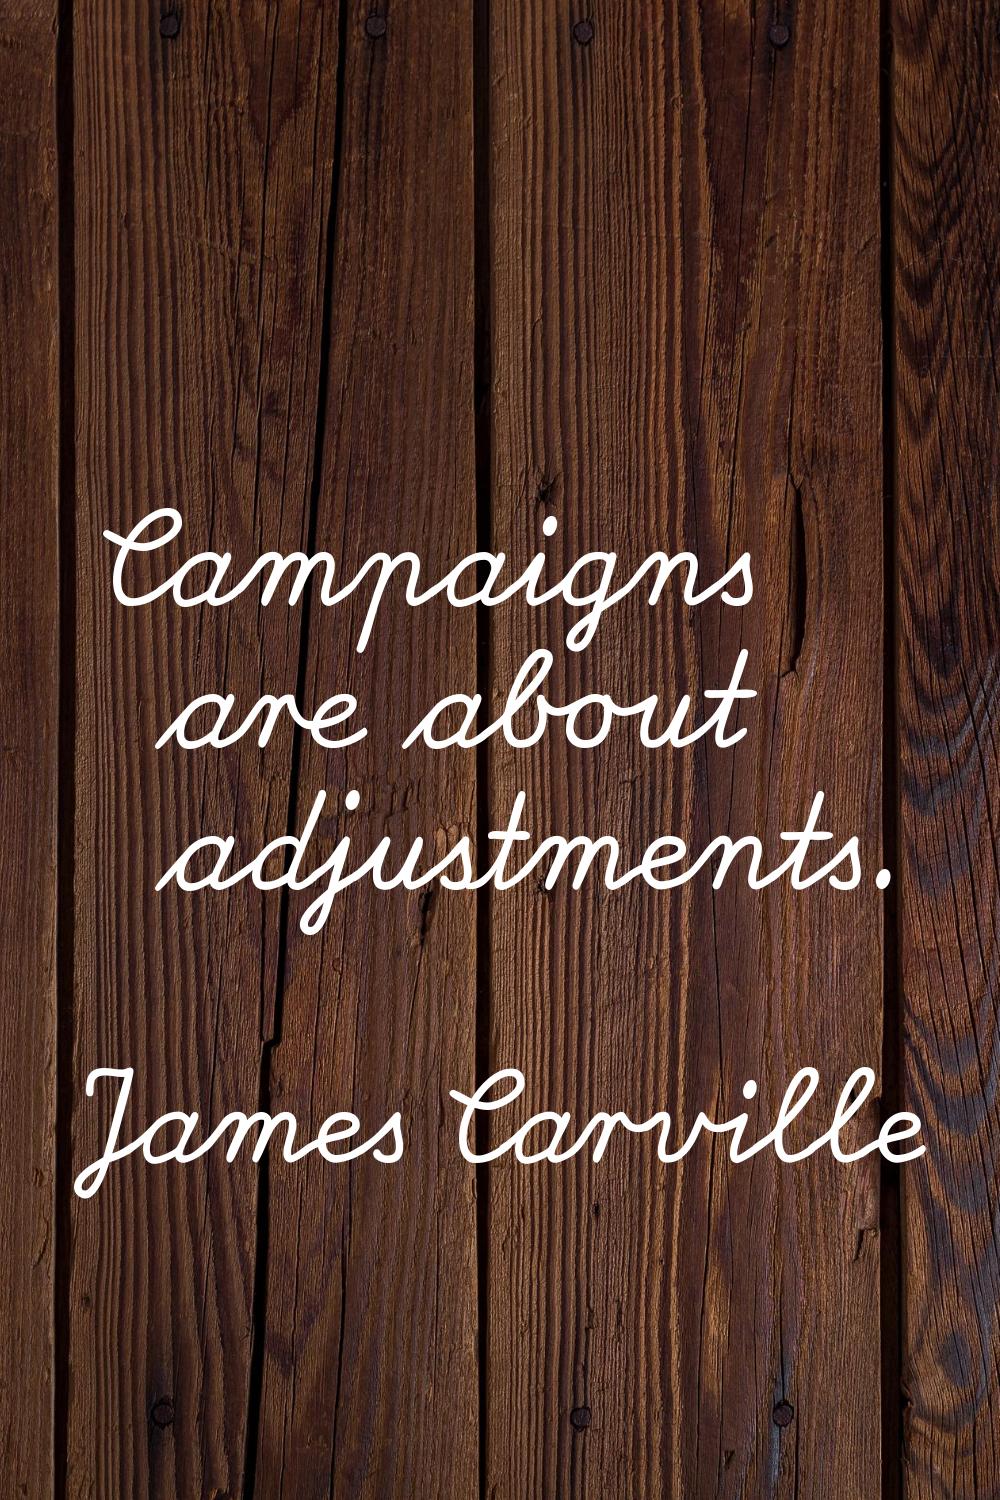 Campaigns are about adjustments.